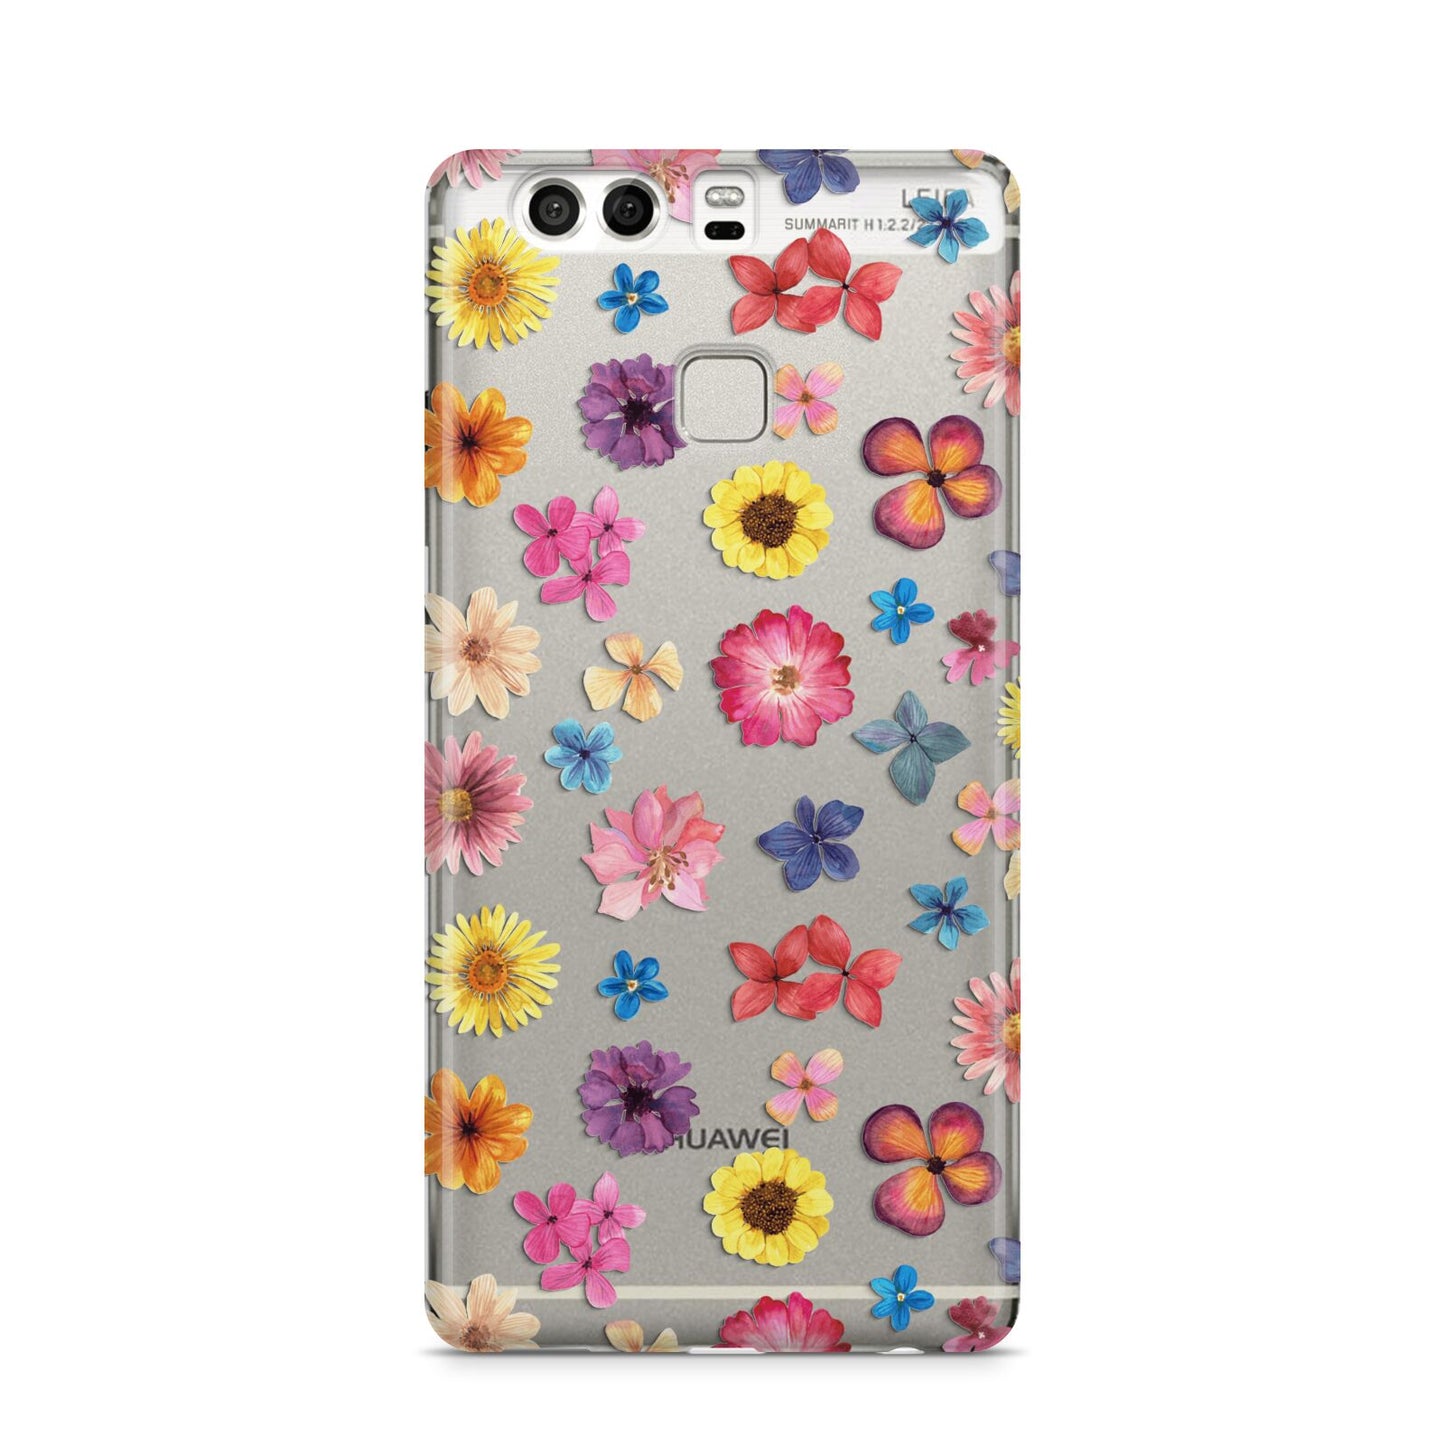 Summer Floral Huawei P9 Case